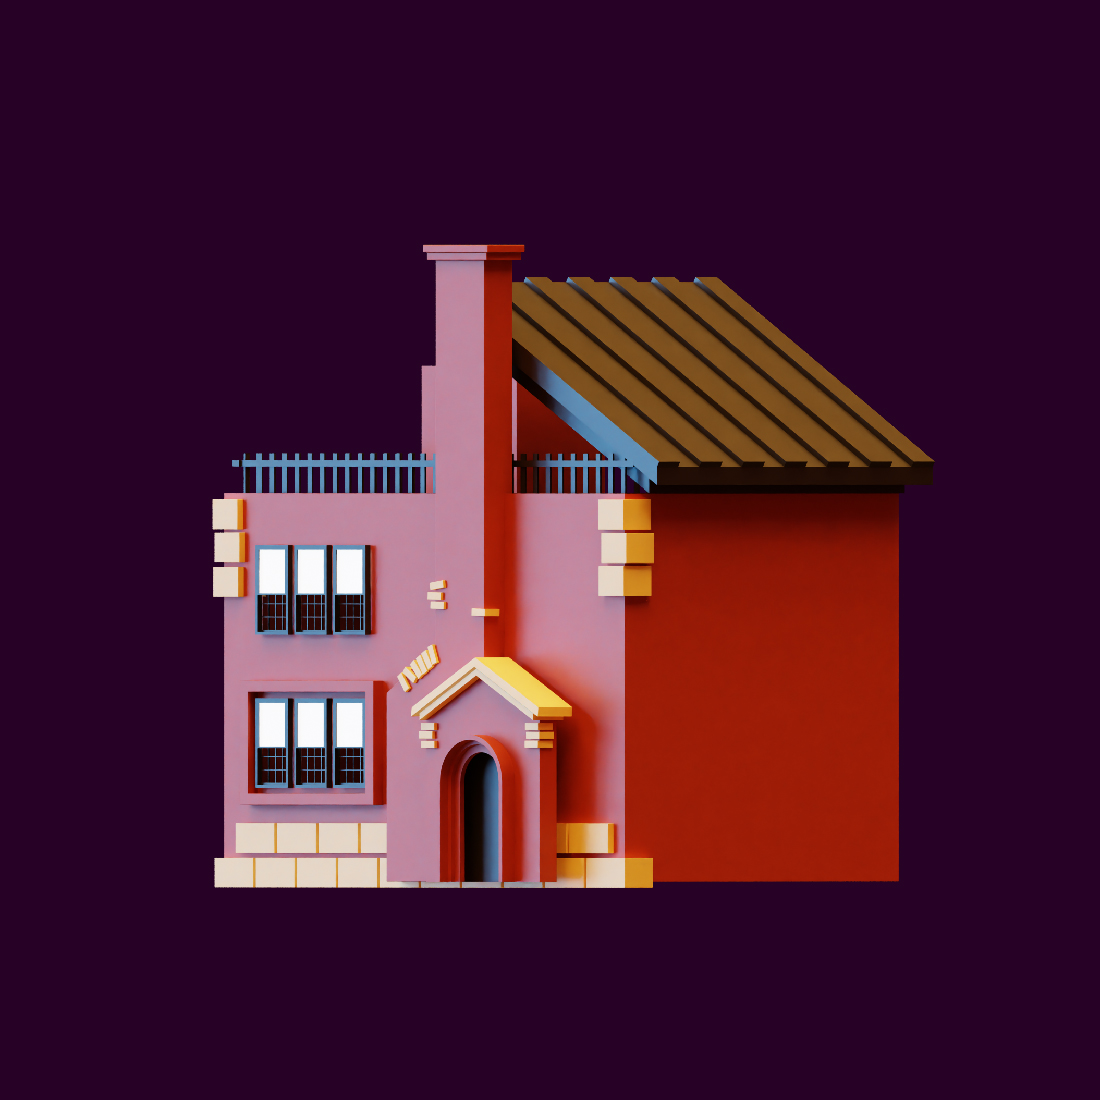 Pink house with a brown roof on a purple background.